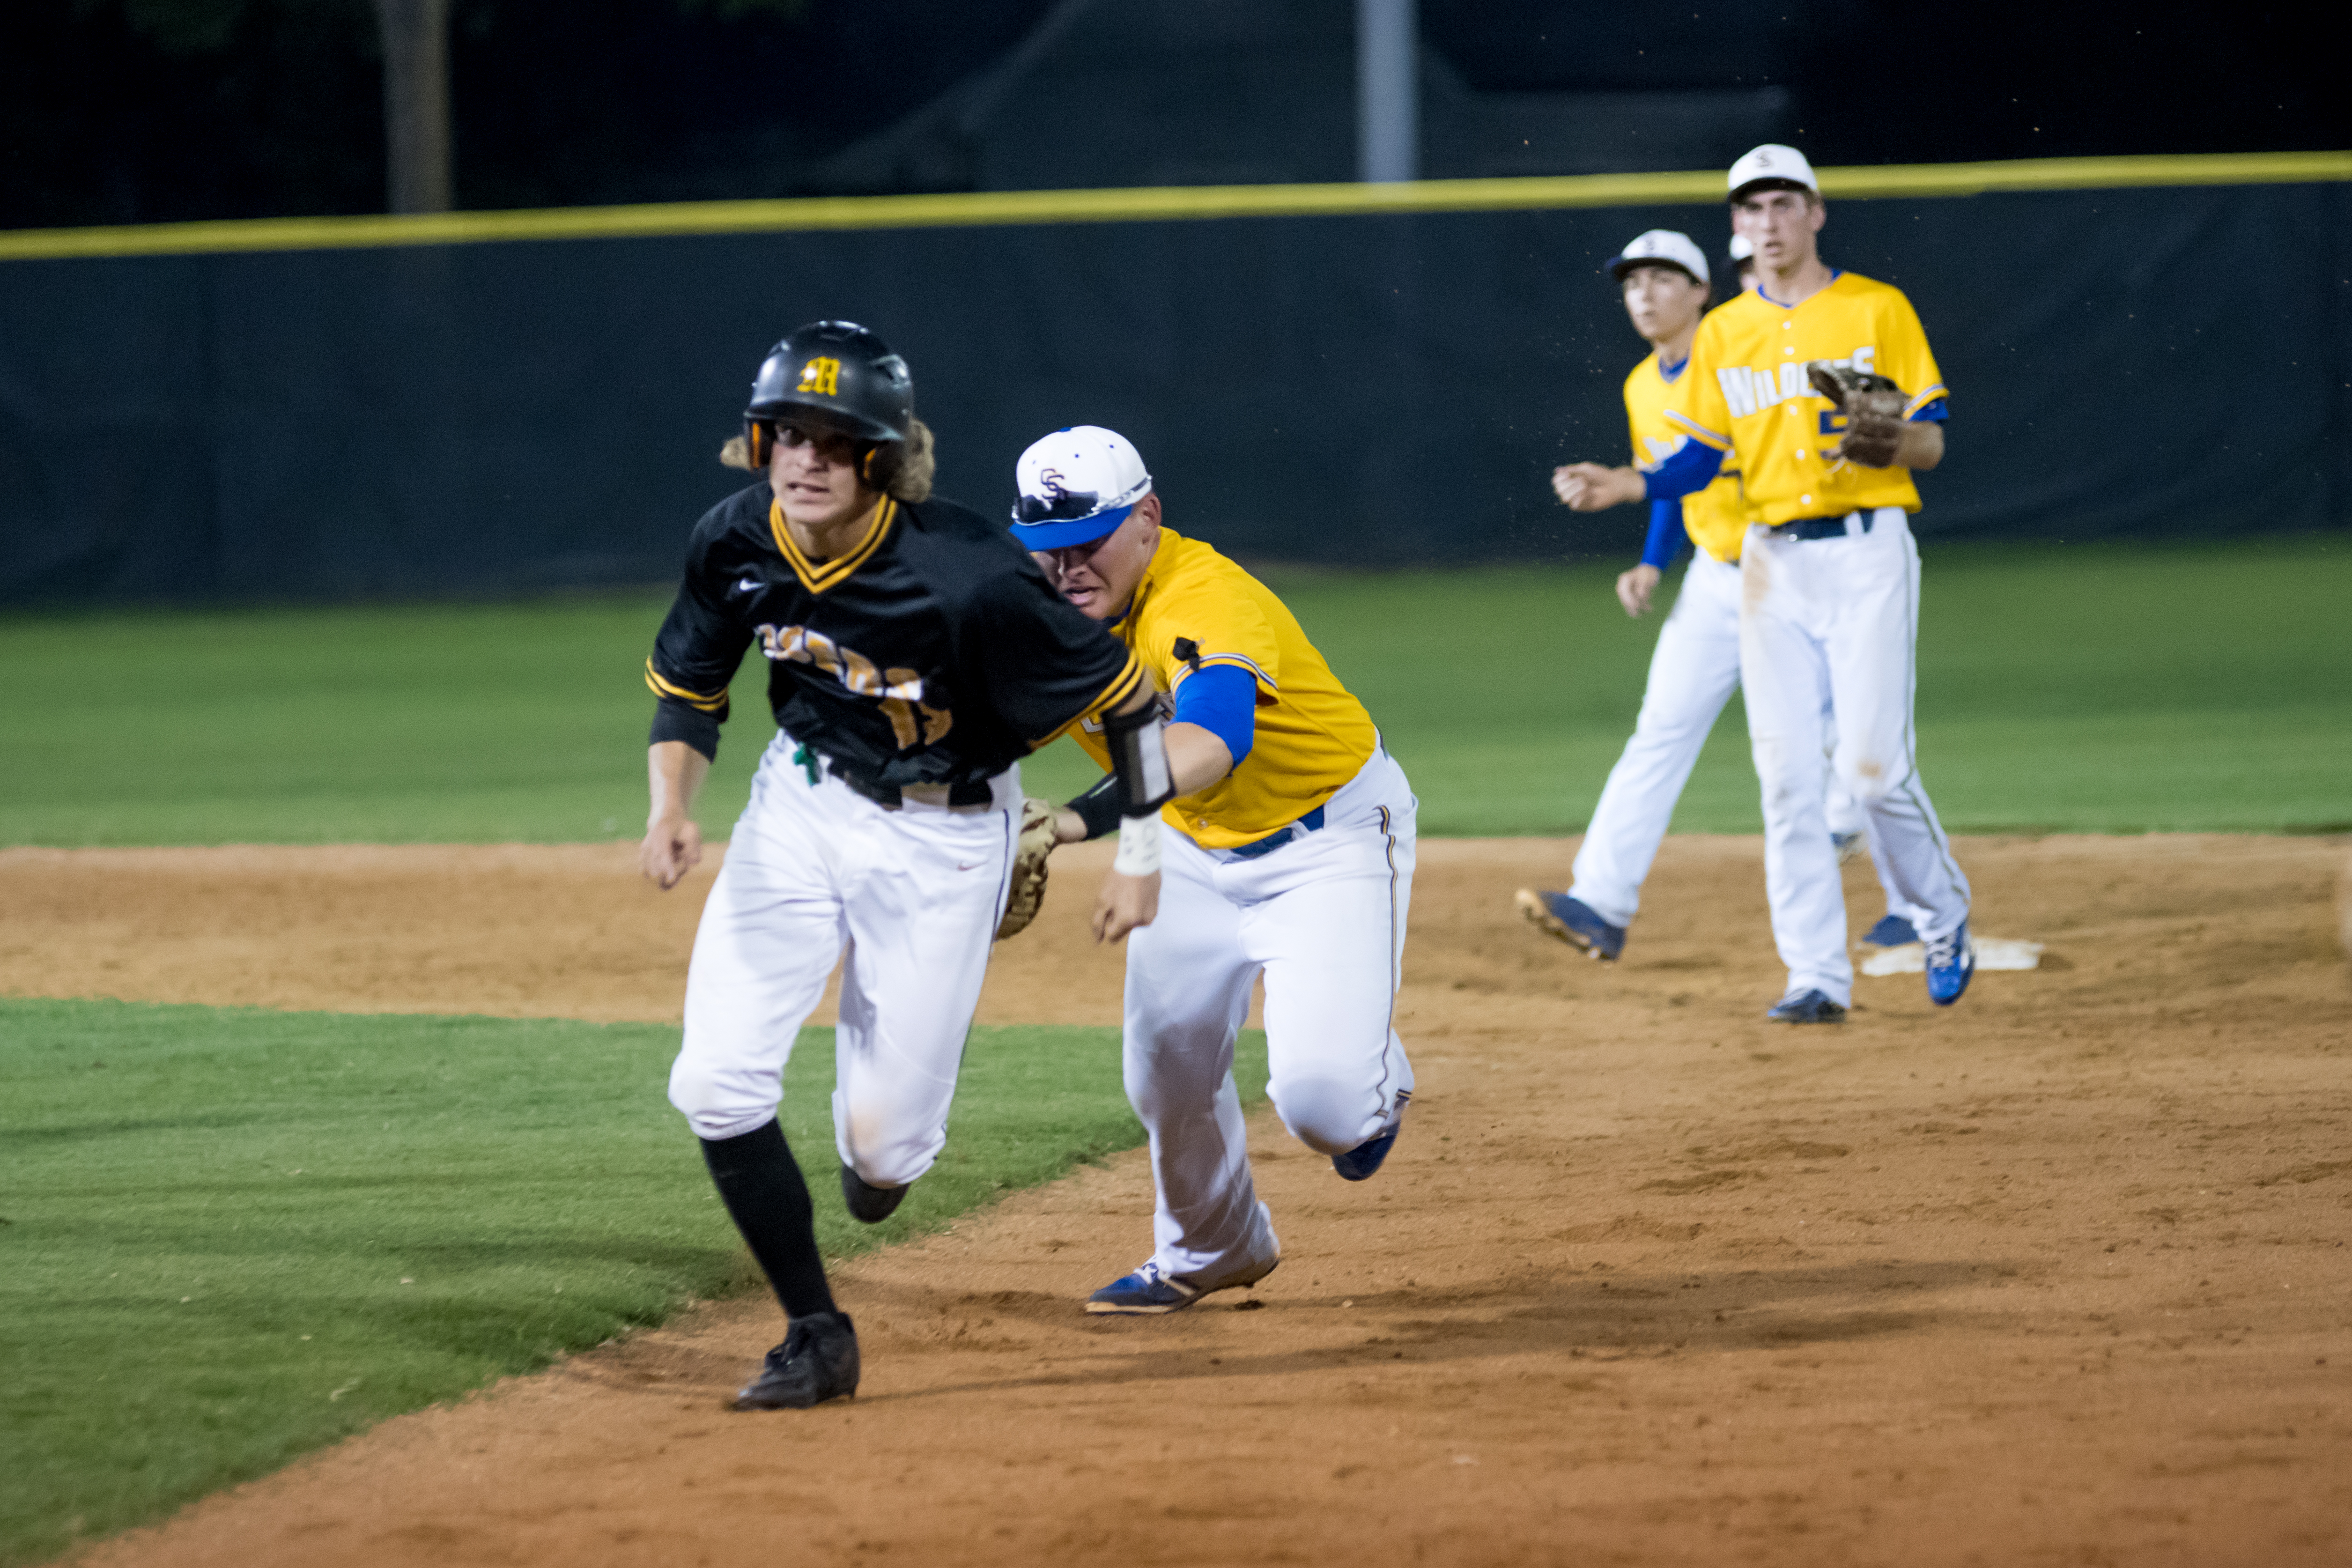 Photos from SSHS Wildcat Baseball’s 3-2 Win over Mt. Pleasant by Cathy Bryan